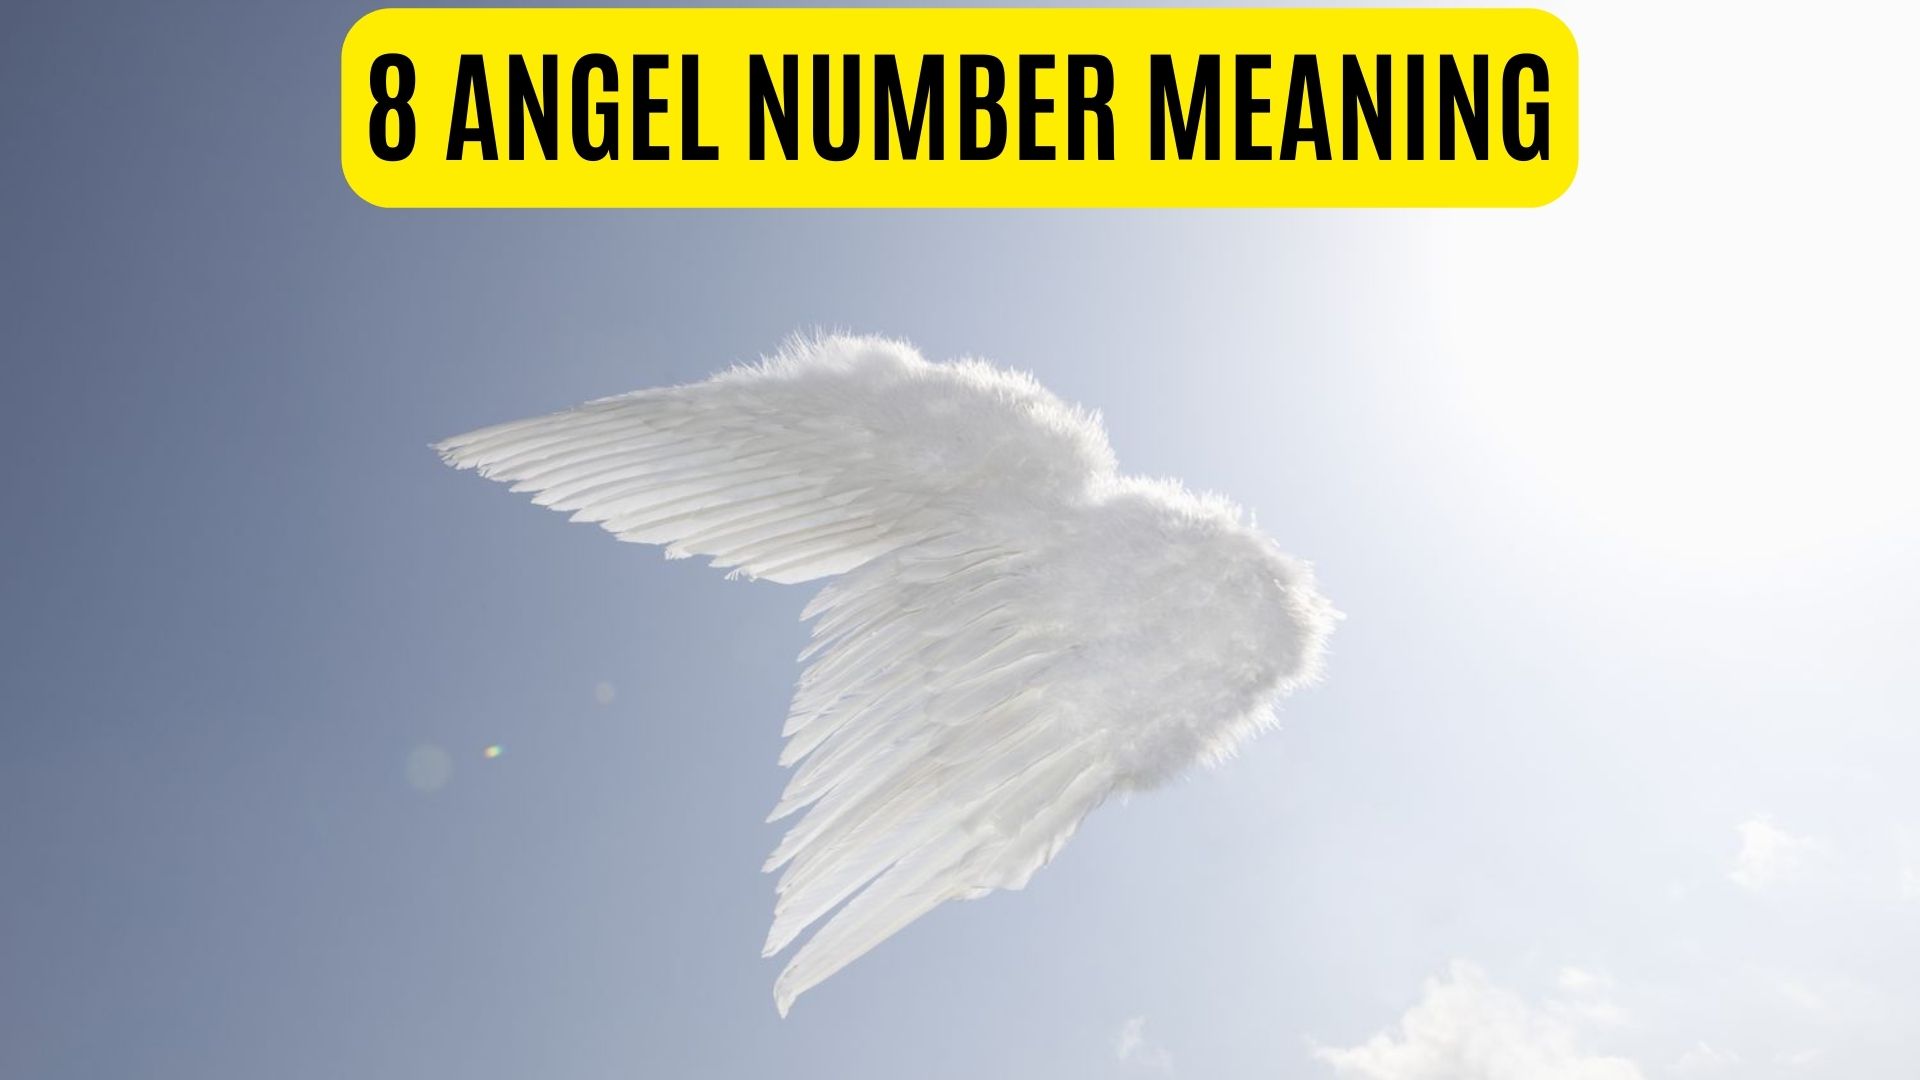 8 Angel Number Meaning - Symbolizes Balance And Inner Stability